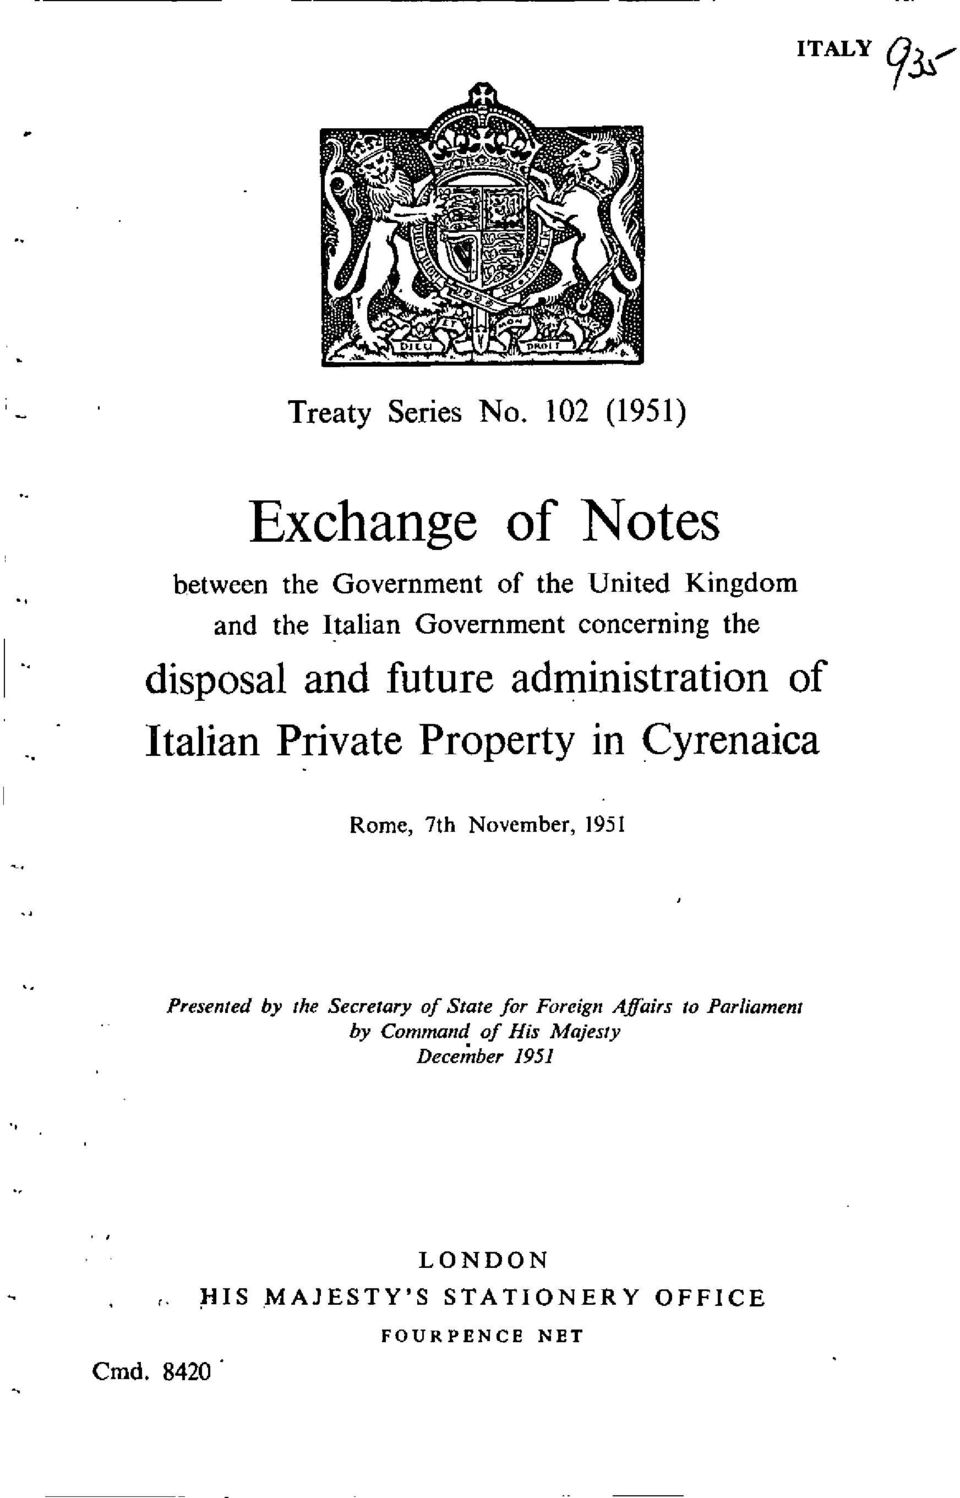 concerning the disposal and future administration of Italian Private Property in Cyrenaica Rome, 7th